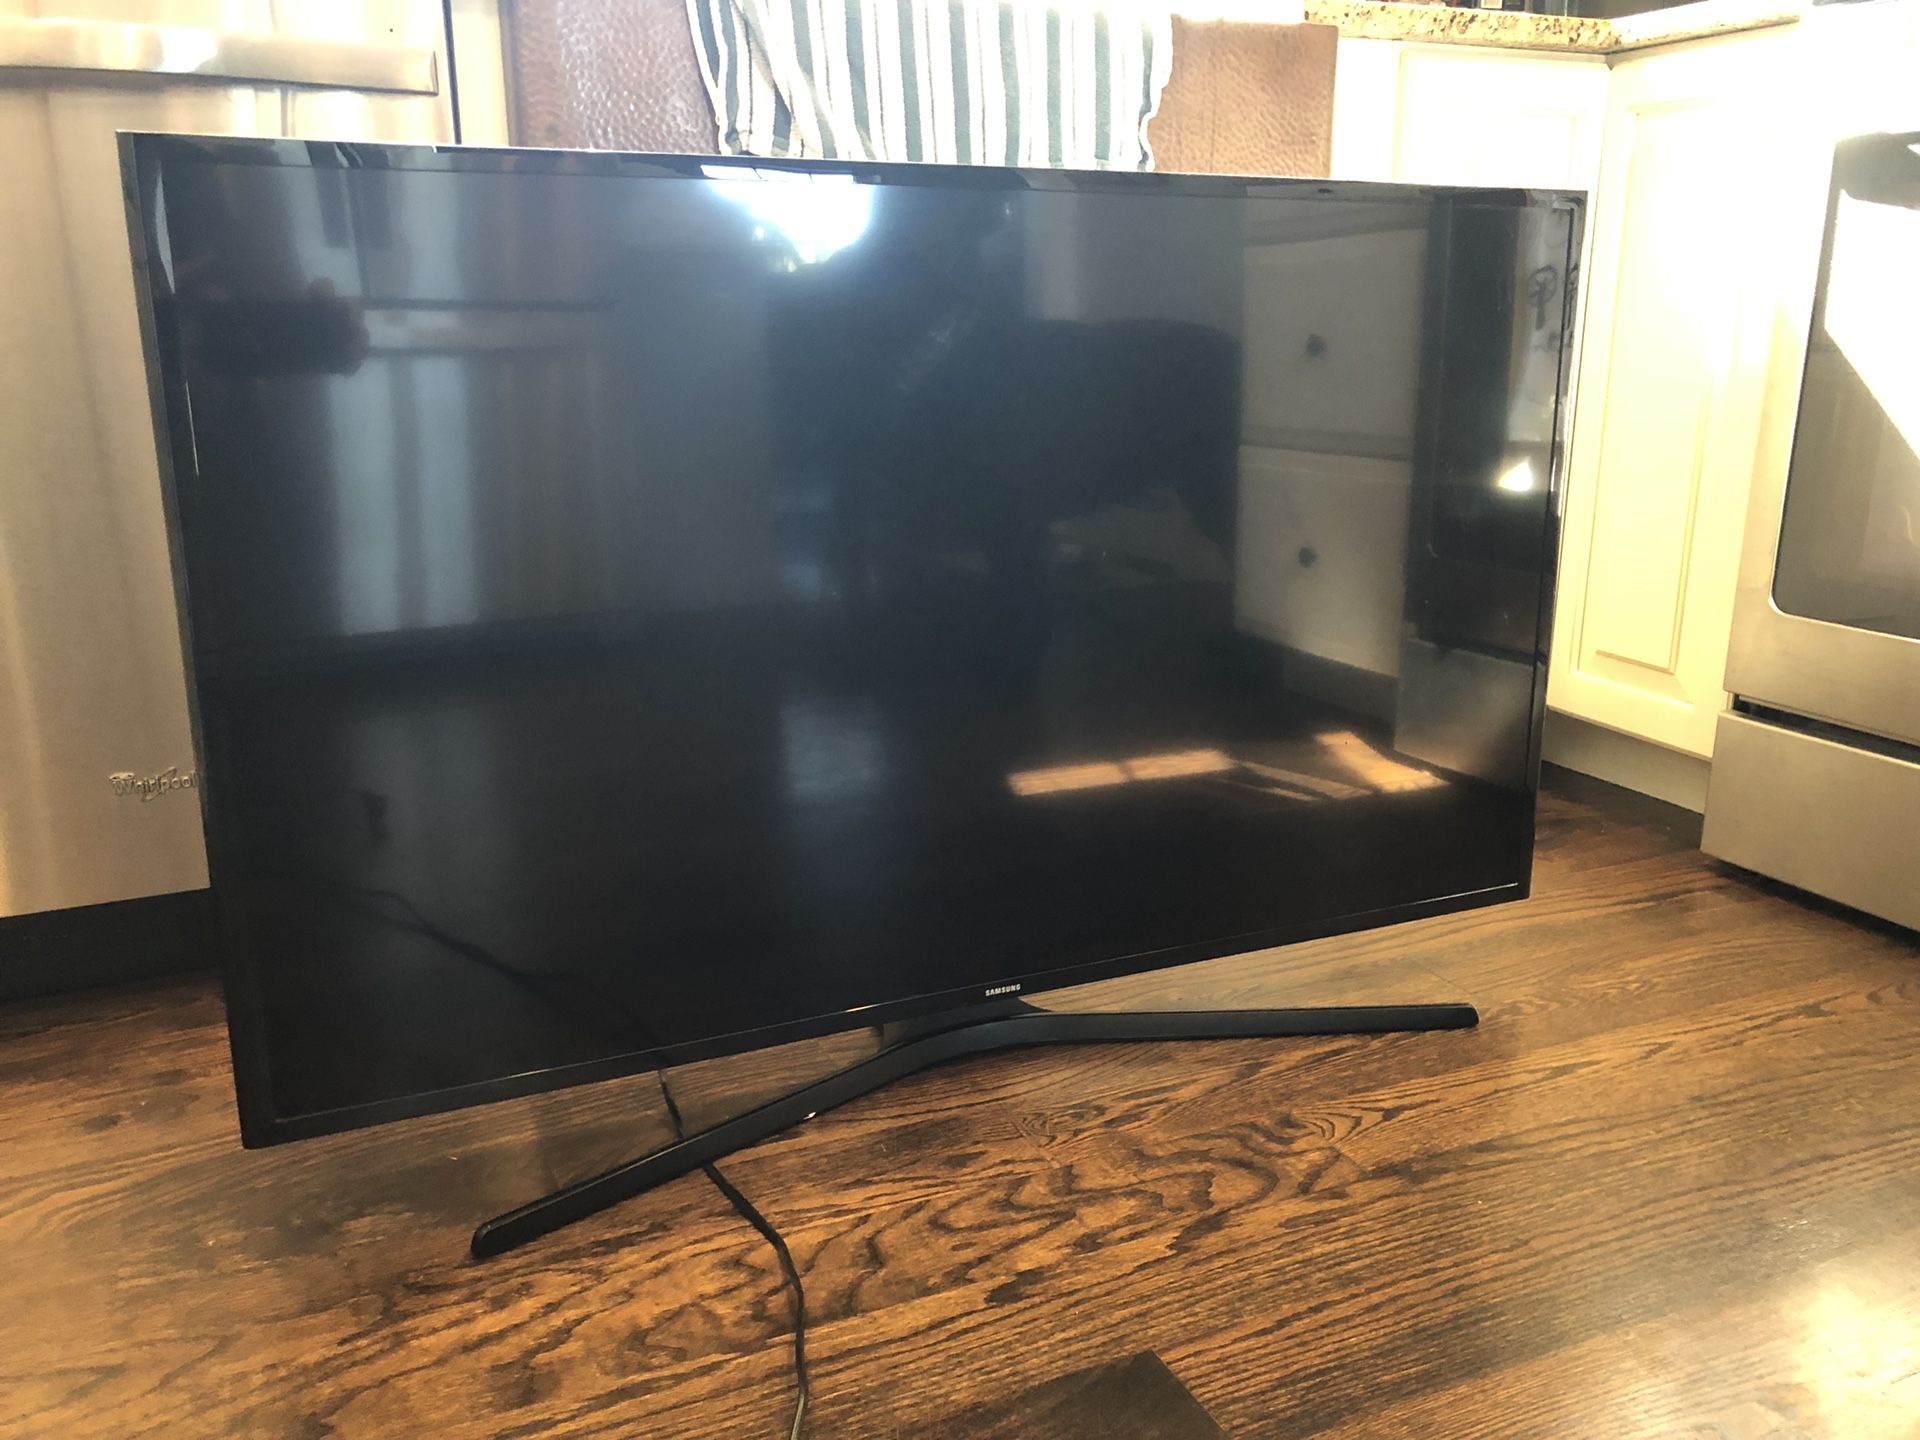 Samsung 48 inch Un48j5200 LED television tv 2 years old excellent condition with remote